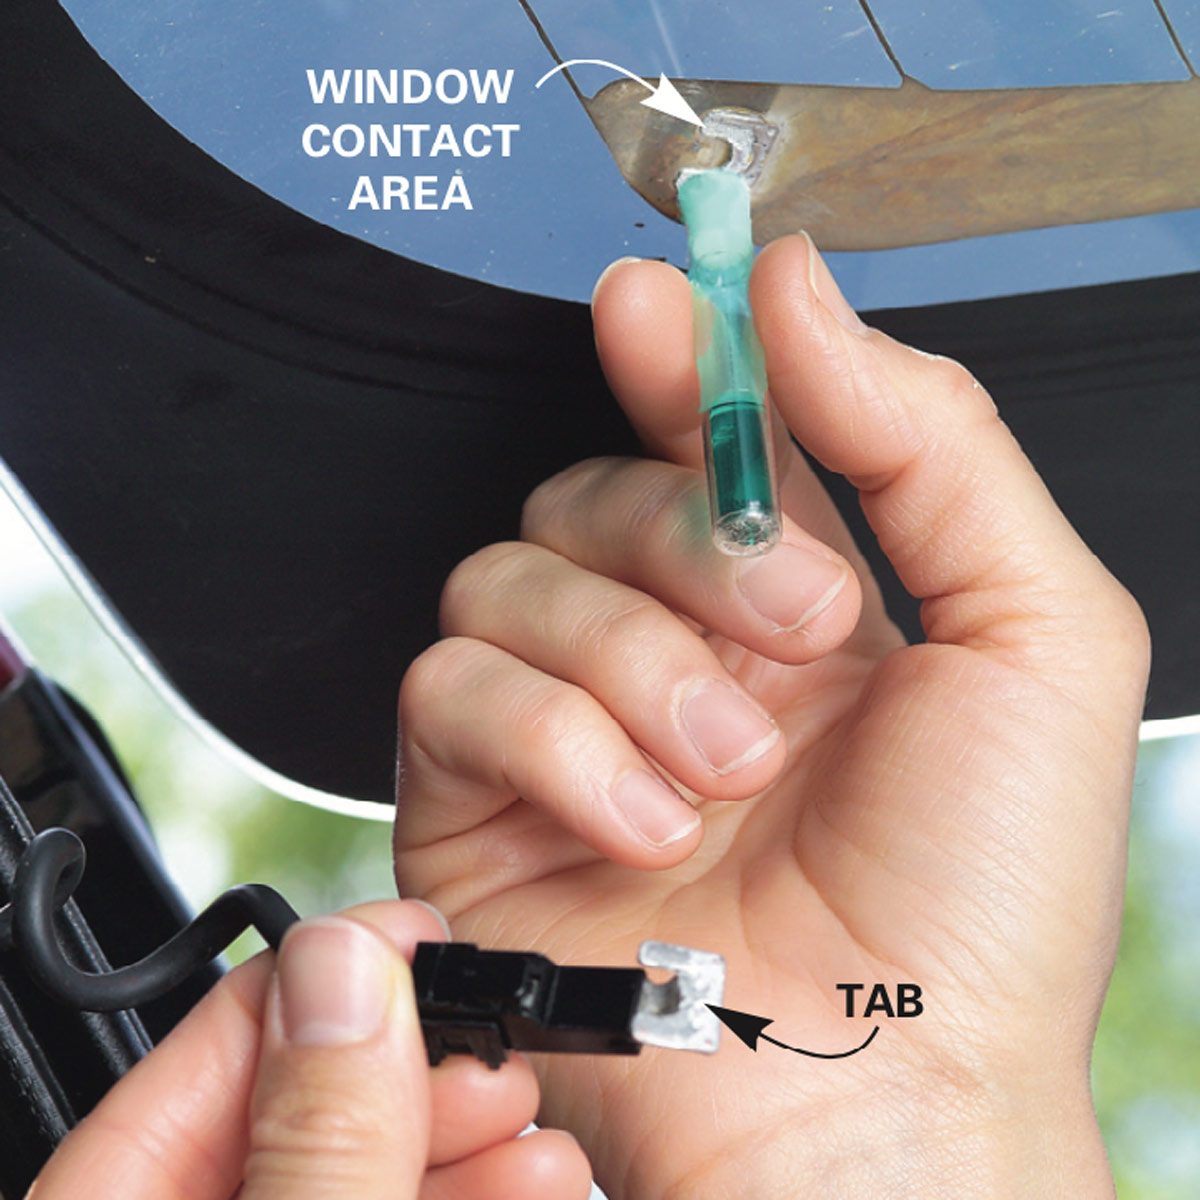 Conductive Rear Window Defroster Repair Kit Corrects Heater Grille Lines DIY